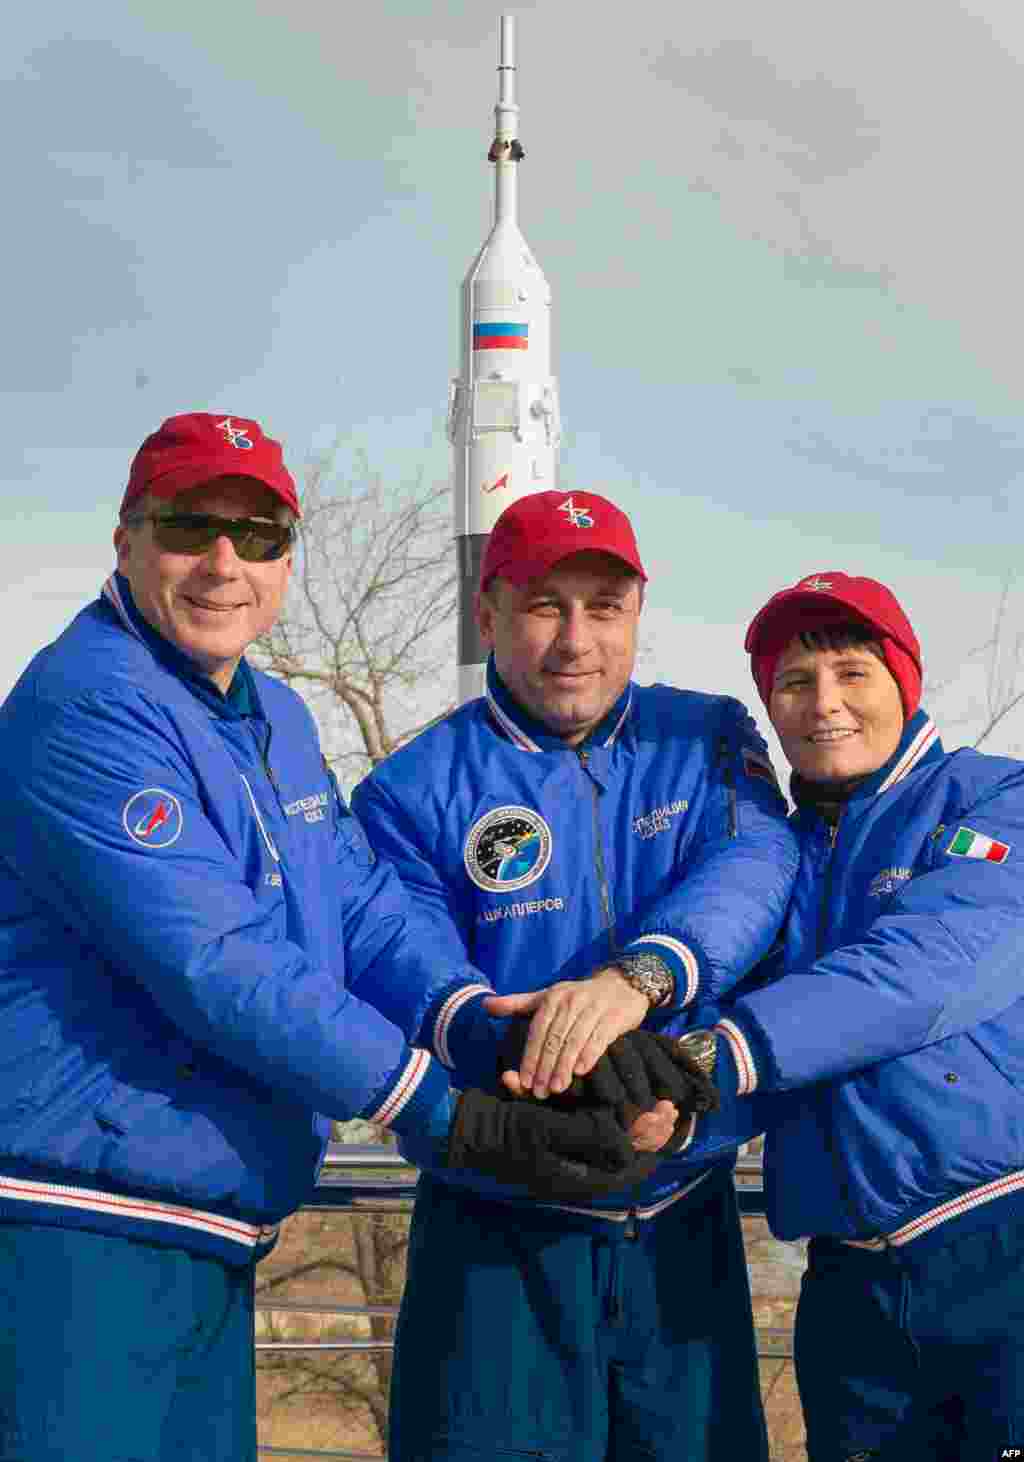 U.S. astronaut Terry Virts (left), Russian cosmonaut Anton Shkaplerov (center), and the European Space Agency's Italian astronaut Samantha Cristoforetti pose in front of the Soyuz TMA-15M space vehicle at its launch pad in Kazakhstan. The three are due to blast off for the International Space Station on November 23. (AFP)